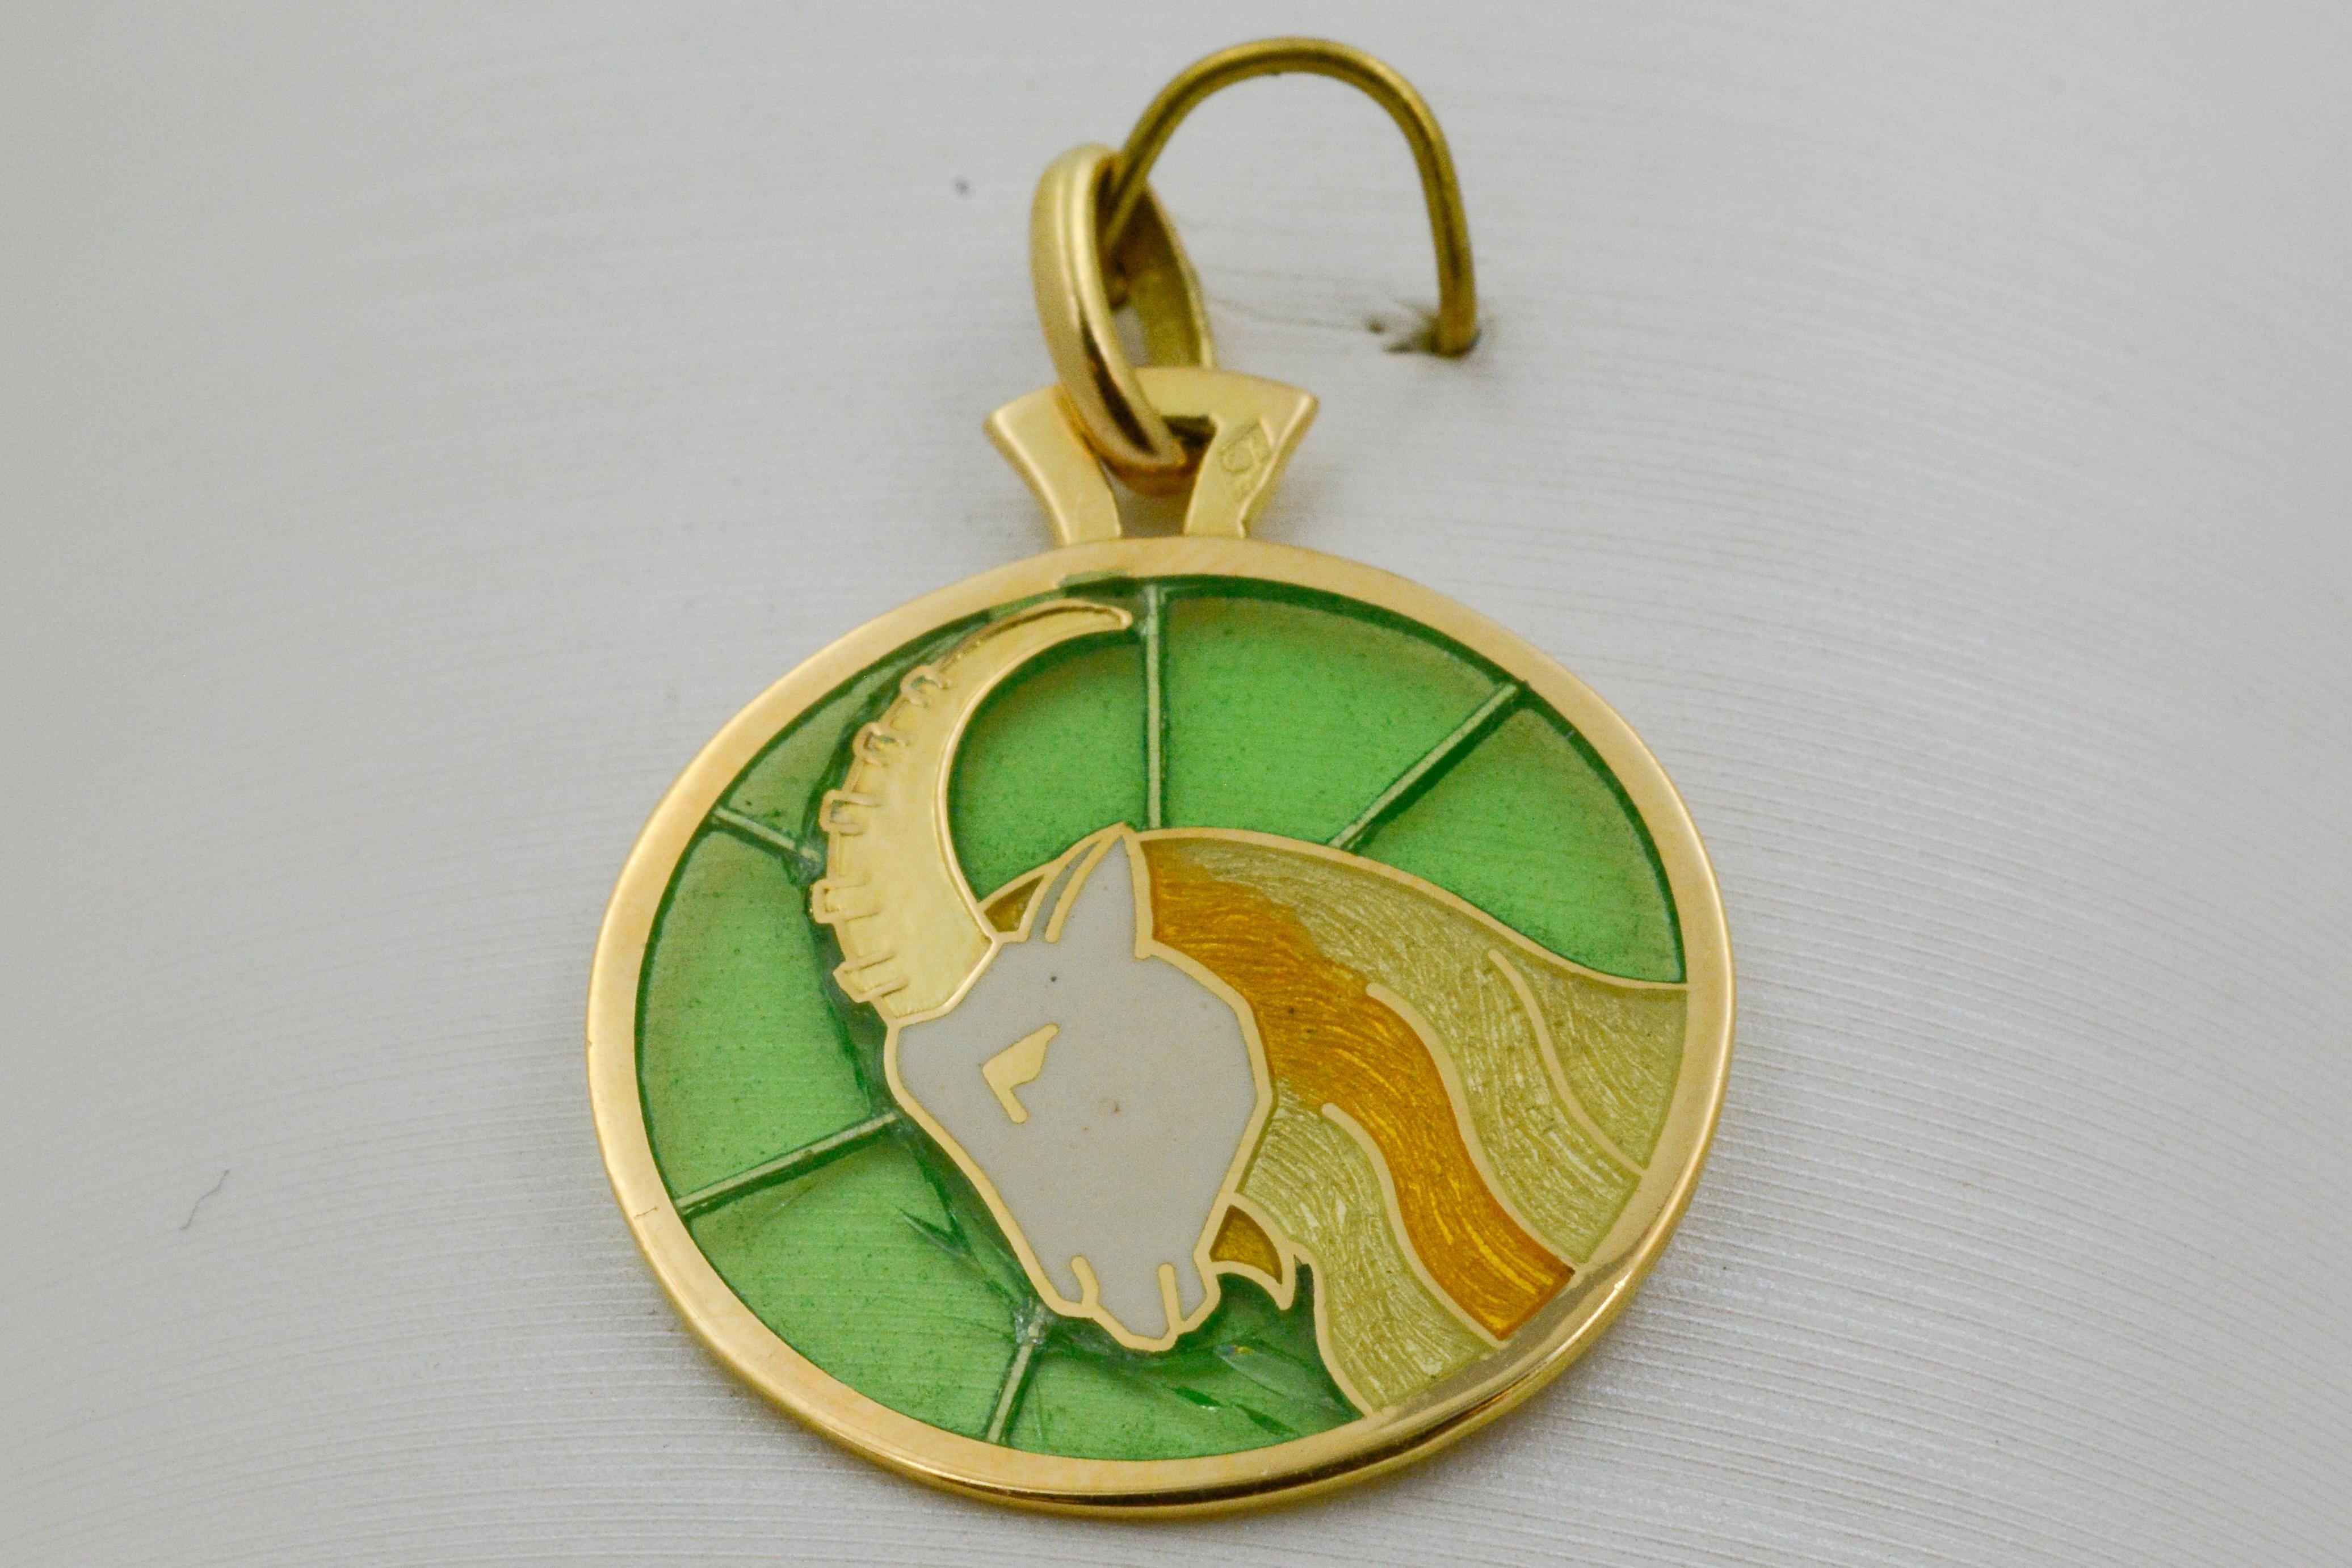 This Plique a Jour pendant features the Capricorn zodiac sign as the central design. The goat is crafted in hand enameled yellow glass on a green background with 18 karat yellow gold outlines and border. 
